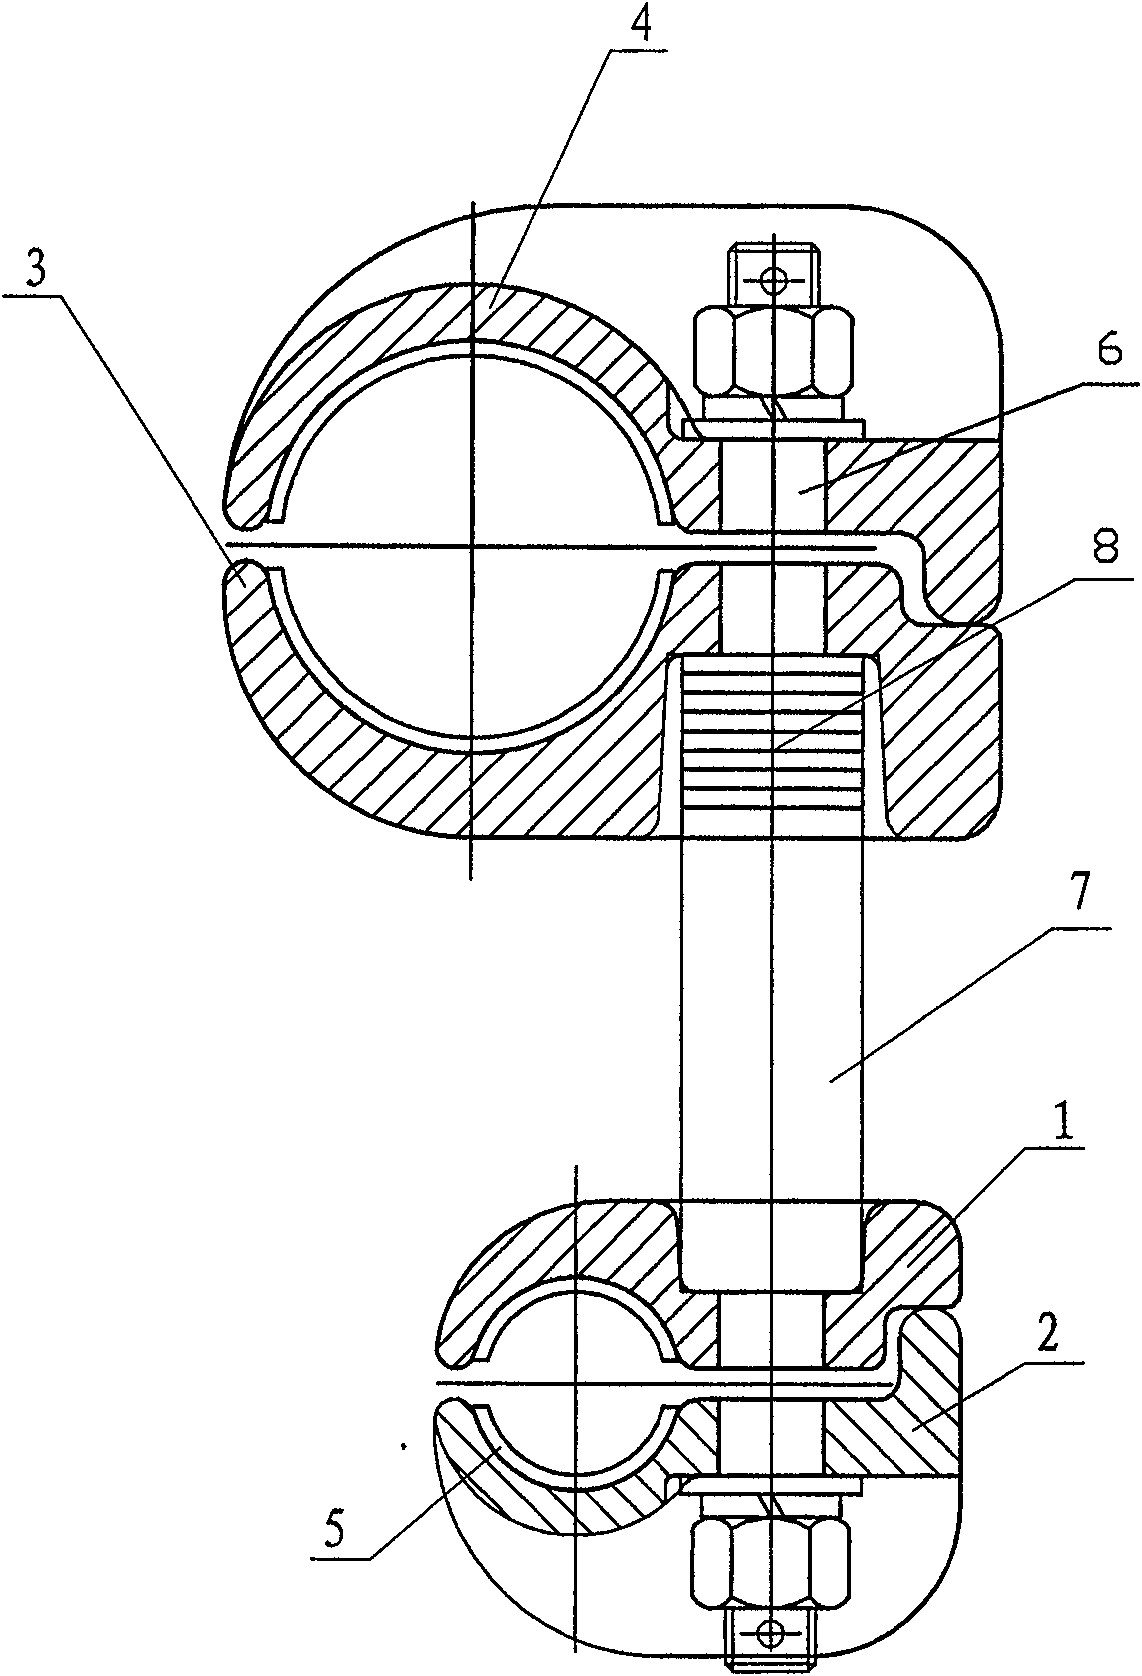 Space-adjusting wire clamp